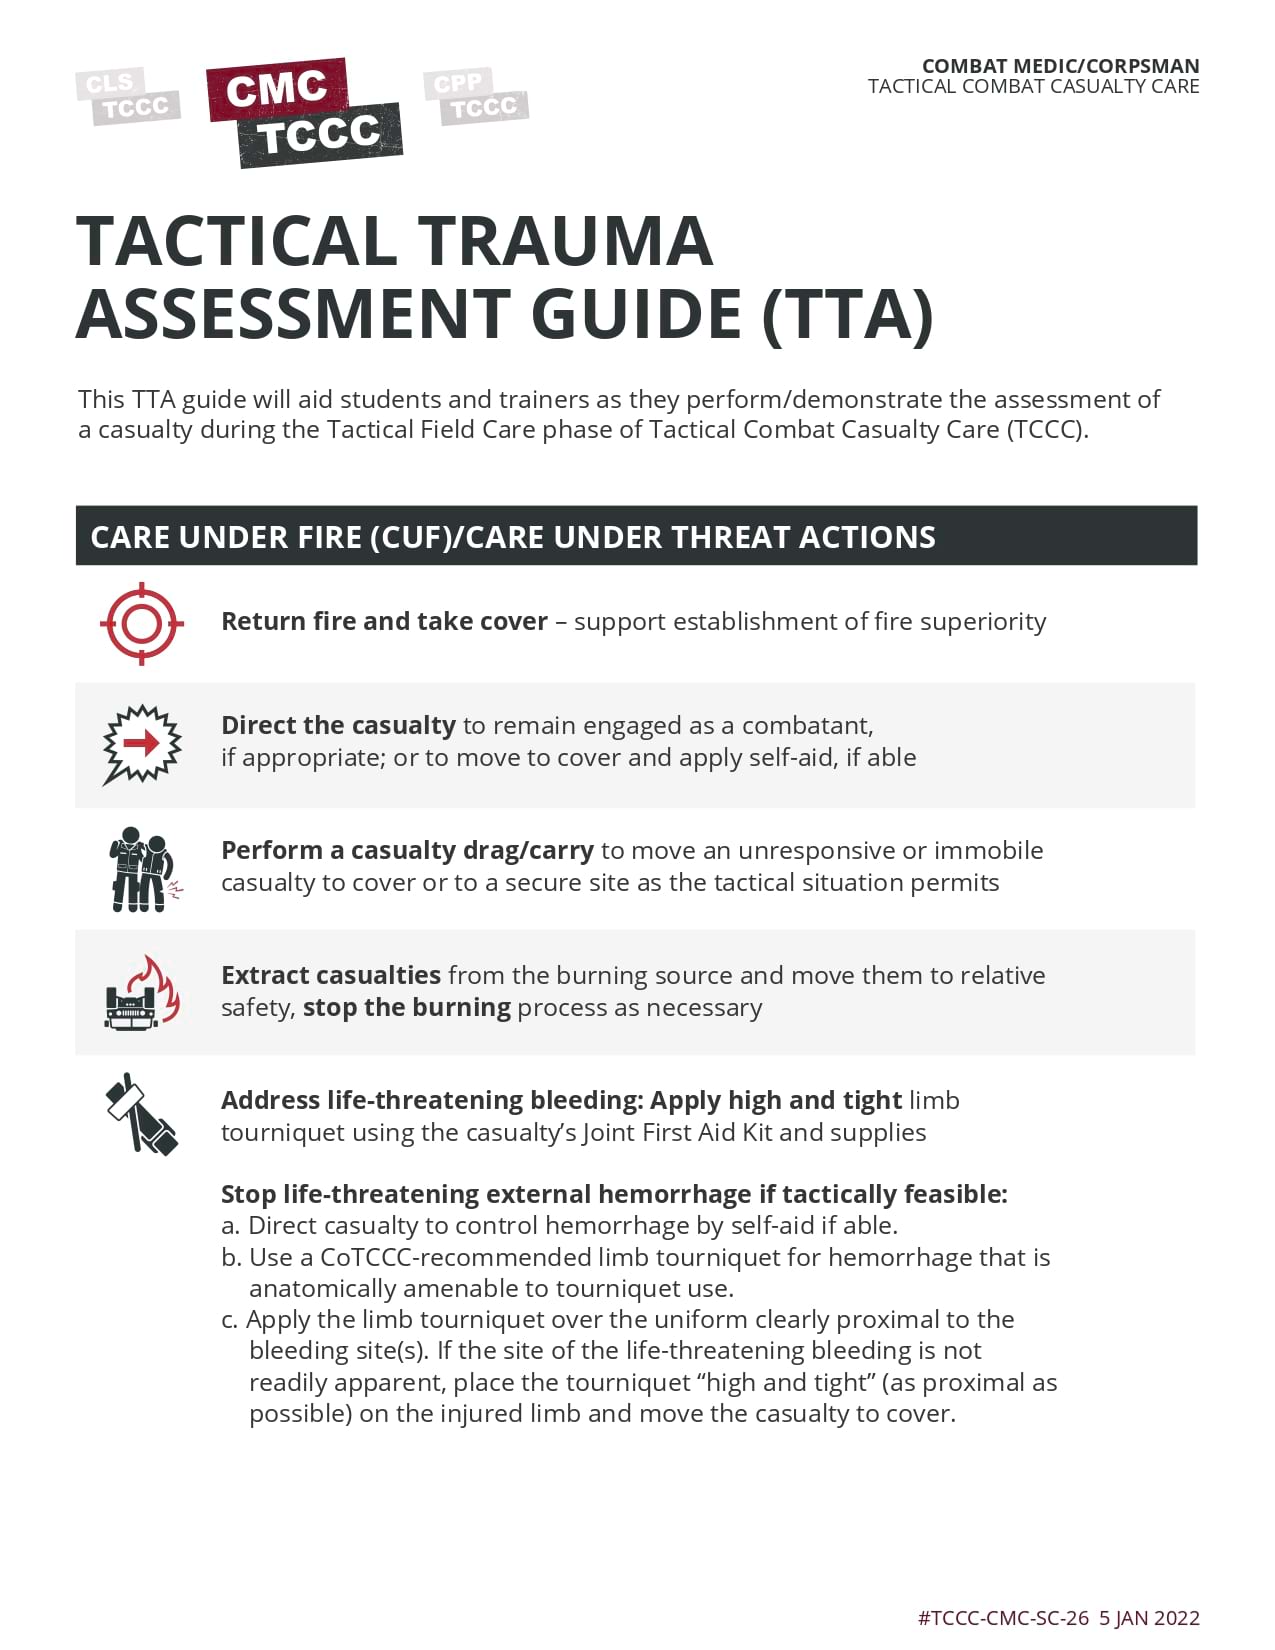 Tactical Trauma Assessment Guide, cmc, page 1